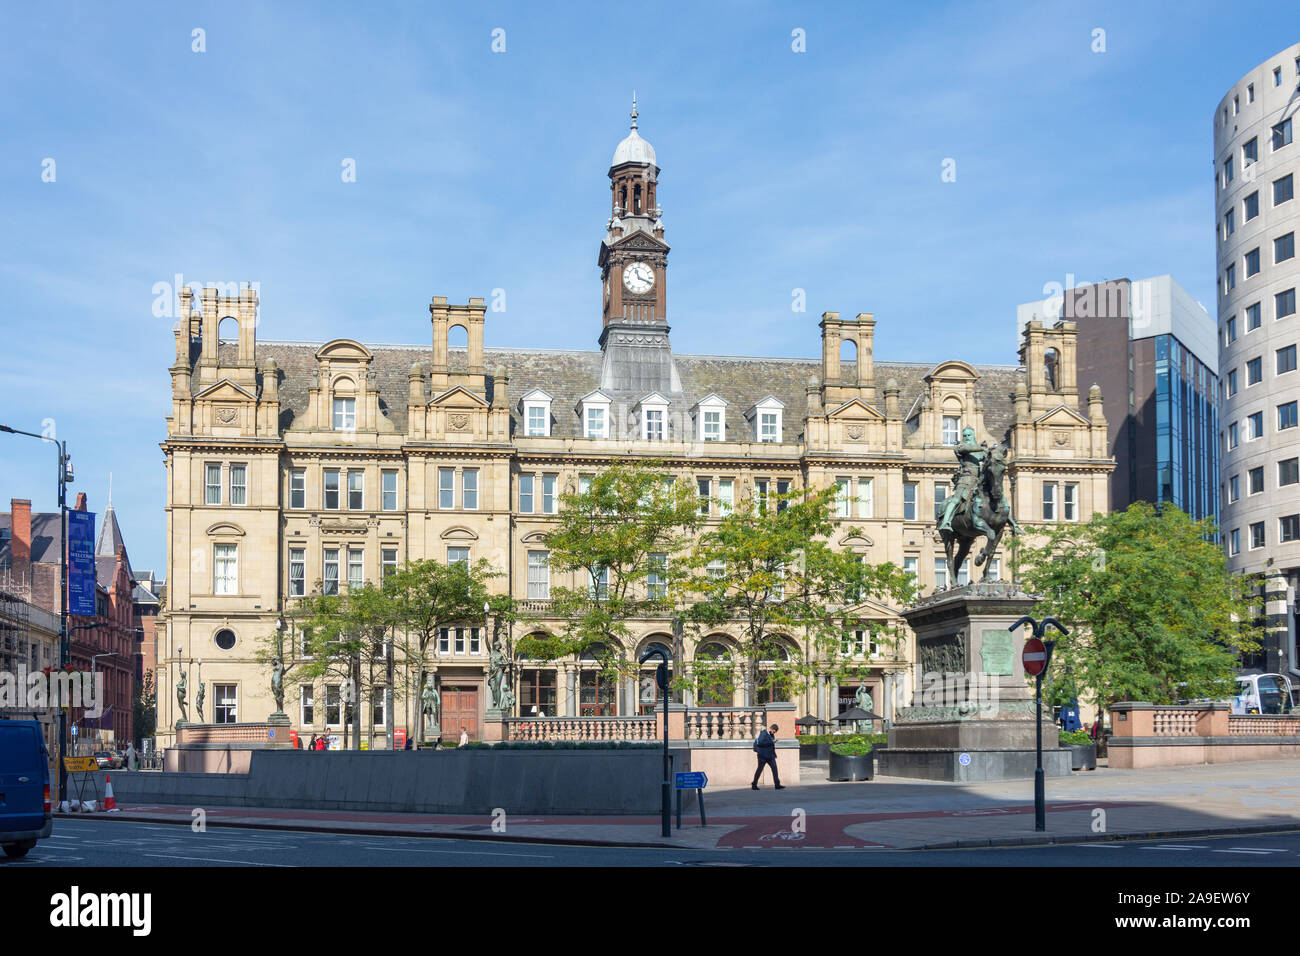 The Old Post Office, City Square, Leeds, West Yorkshire, England, United Kingdom Stock Photo